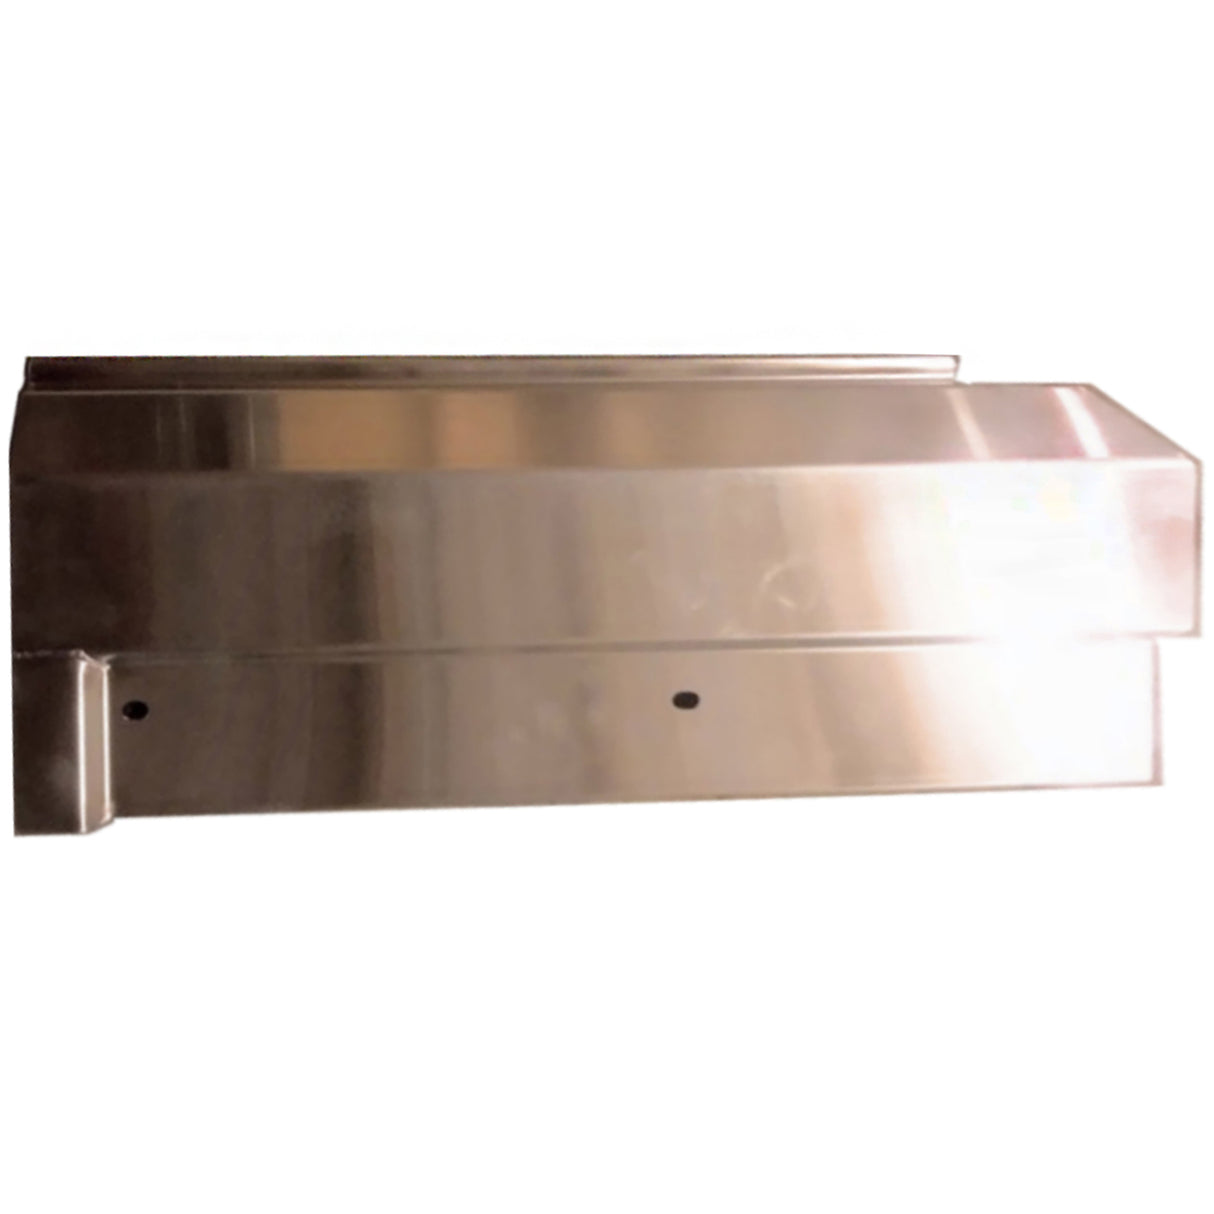 Stainless Steel Cover Plate RIGHT Heavy Duty Lely A3, A4 and A5 Corr. 5.1103.1266.0